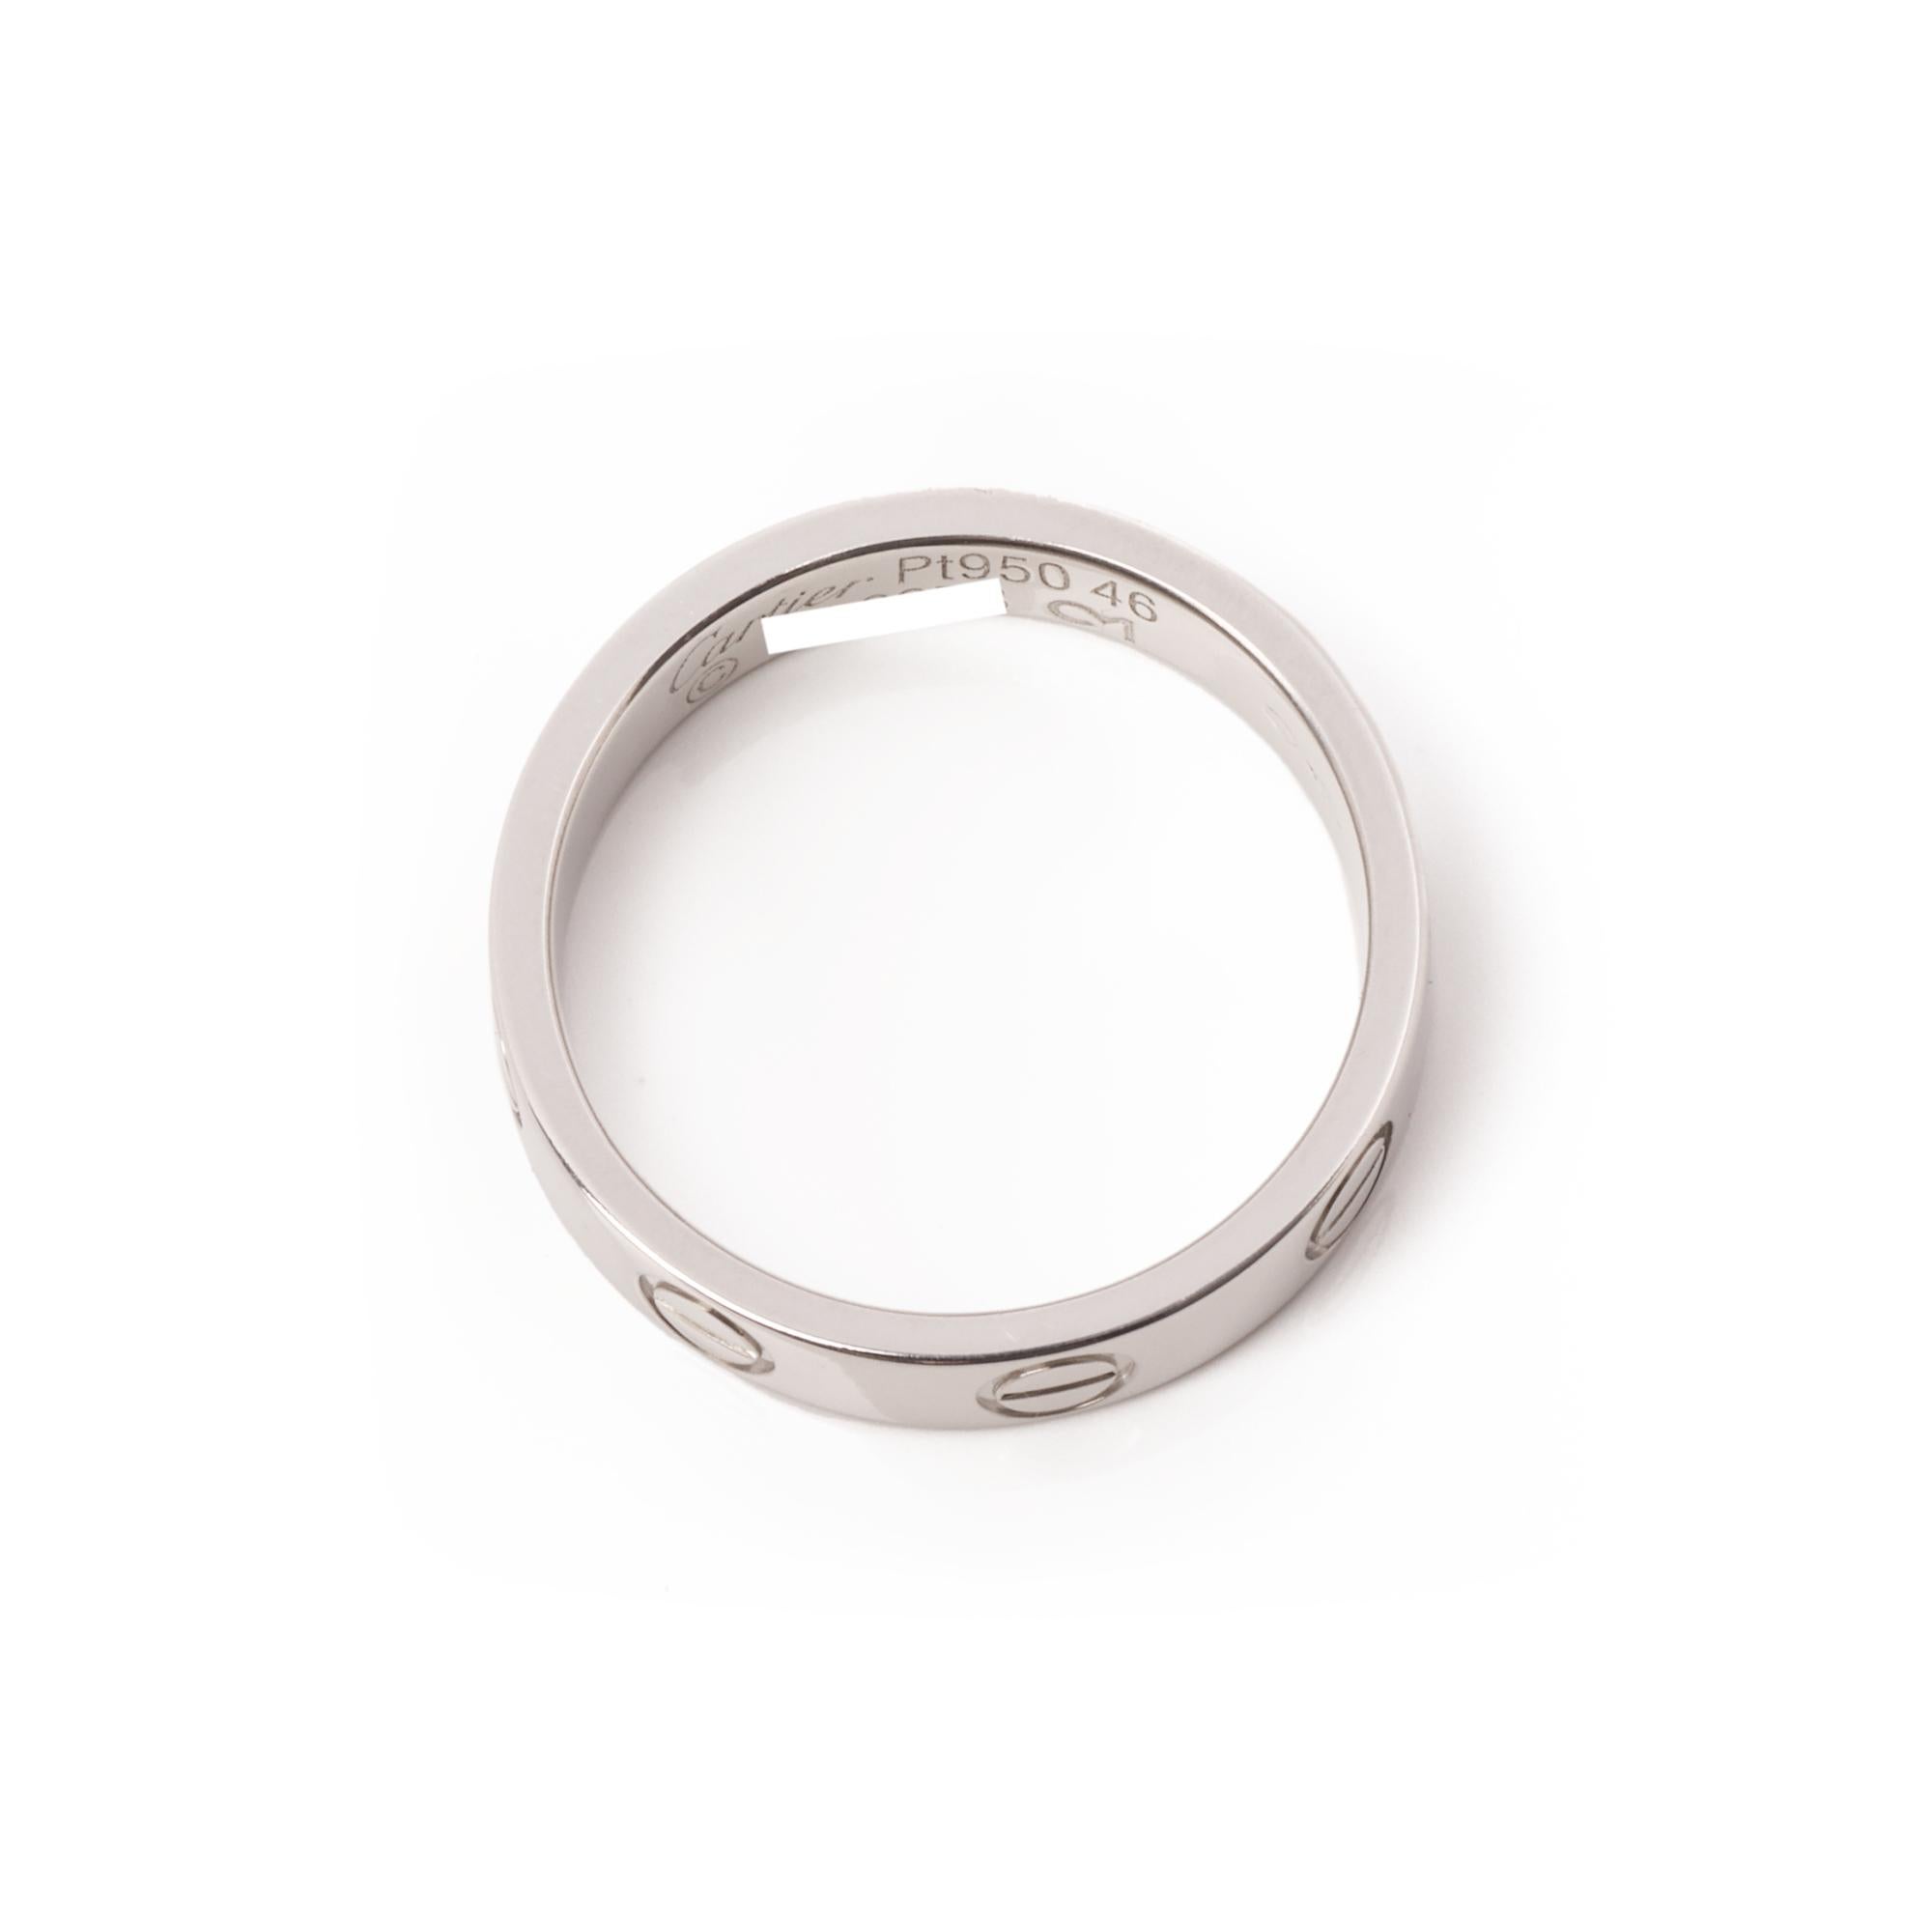 Cartier Platinum Love Wedding Band Ring

Brand Cartier
Model Love Wedding Band
Product Type Ring
Serial Number FF****
Material(s) Platinum
UK Ring Size H
EU Ring Size 46
US Ring Size 3 3/4
Resizing Possible No
Band Width 3.7mm
Total Weight